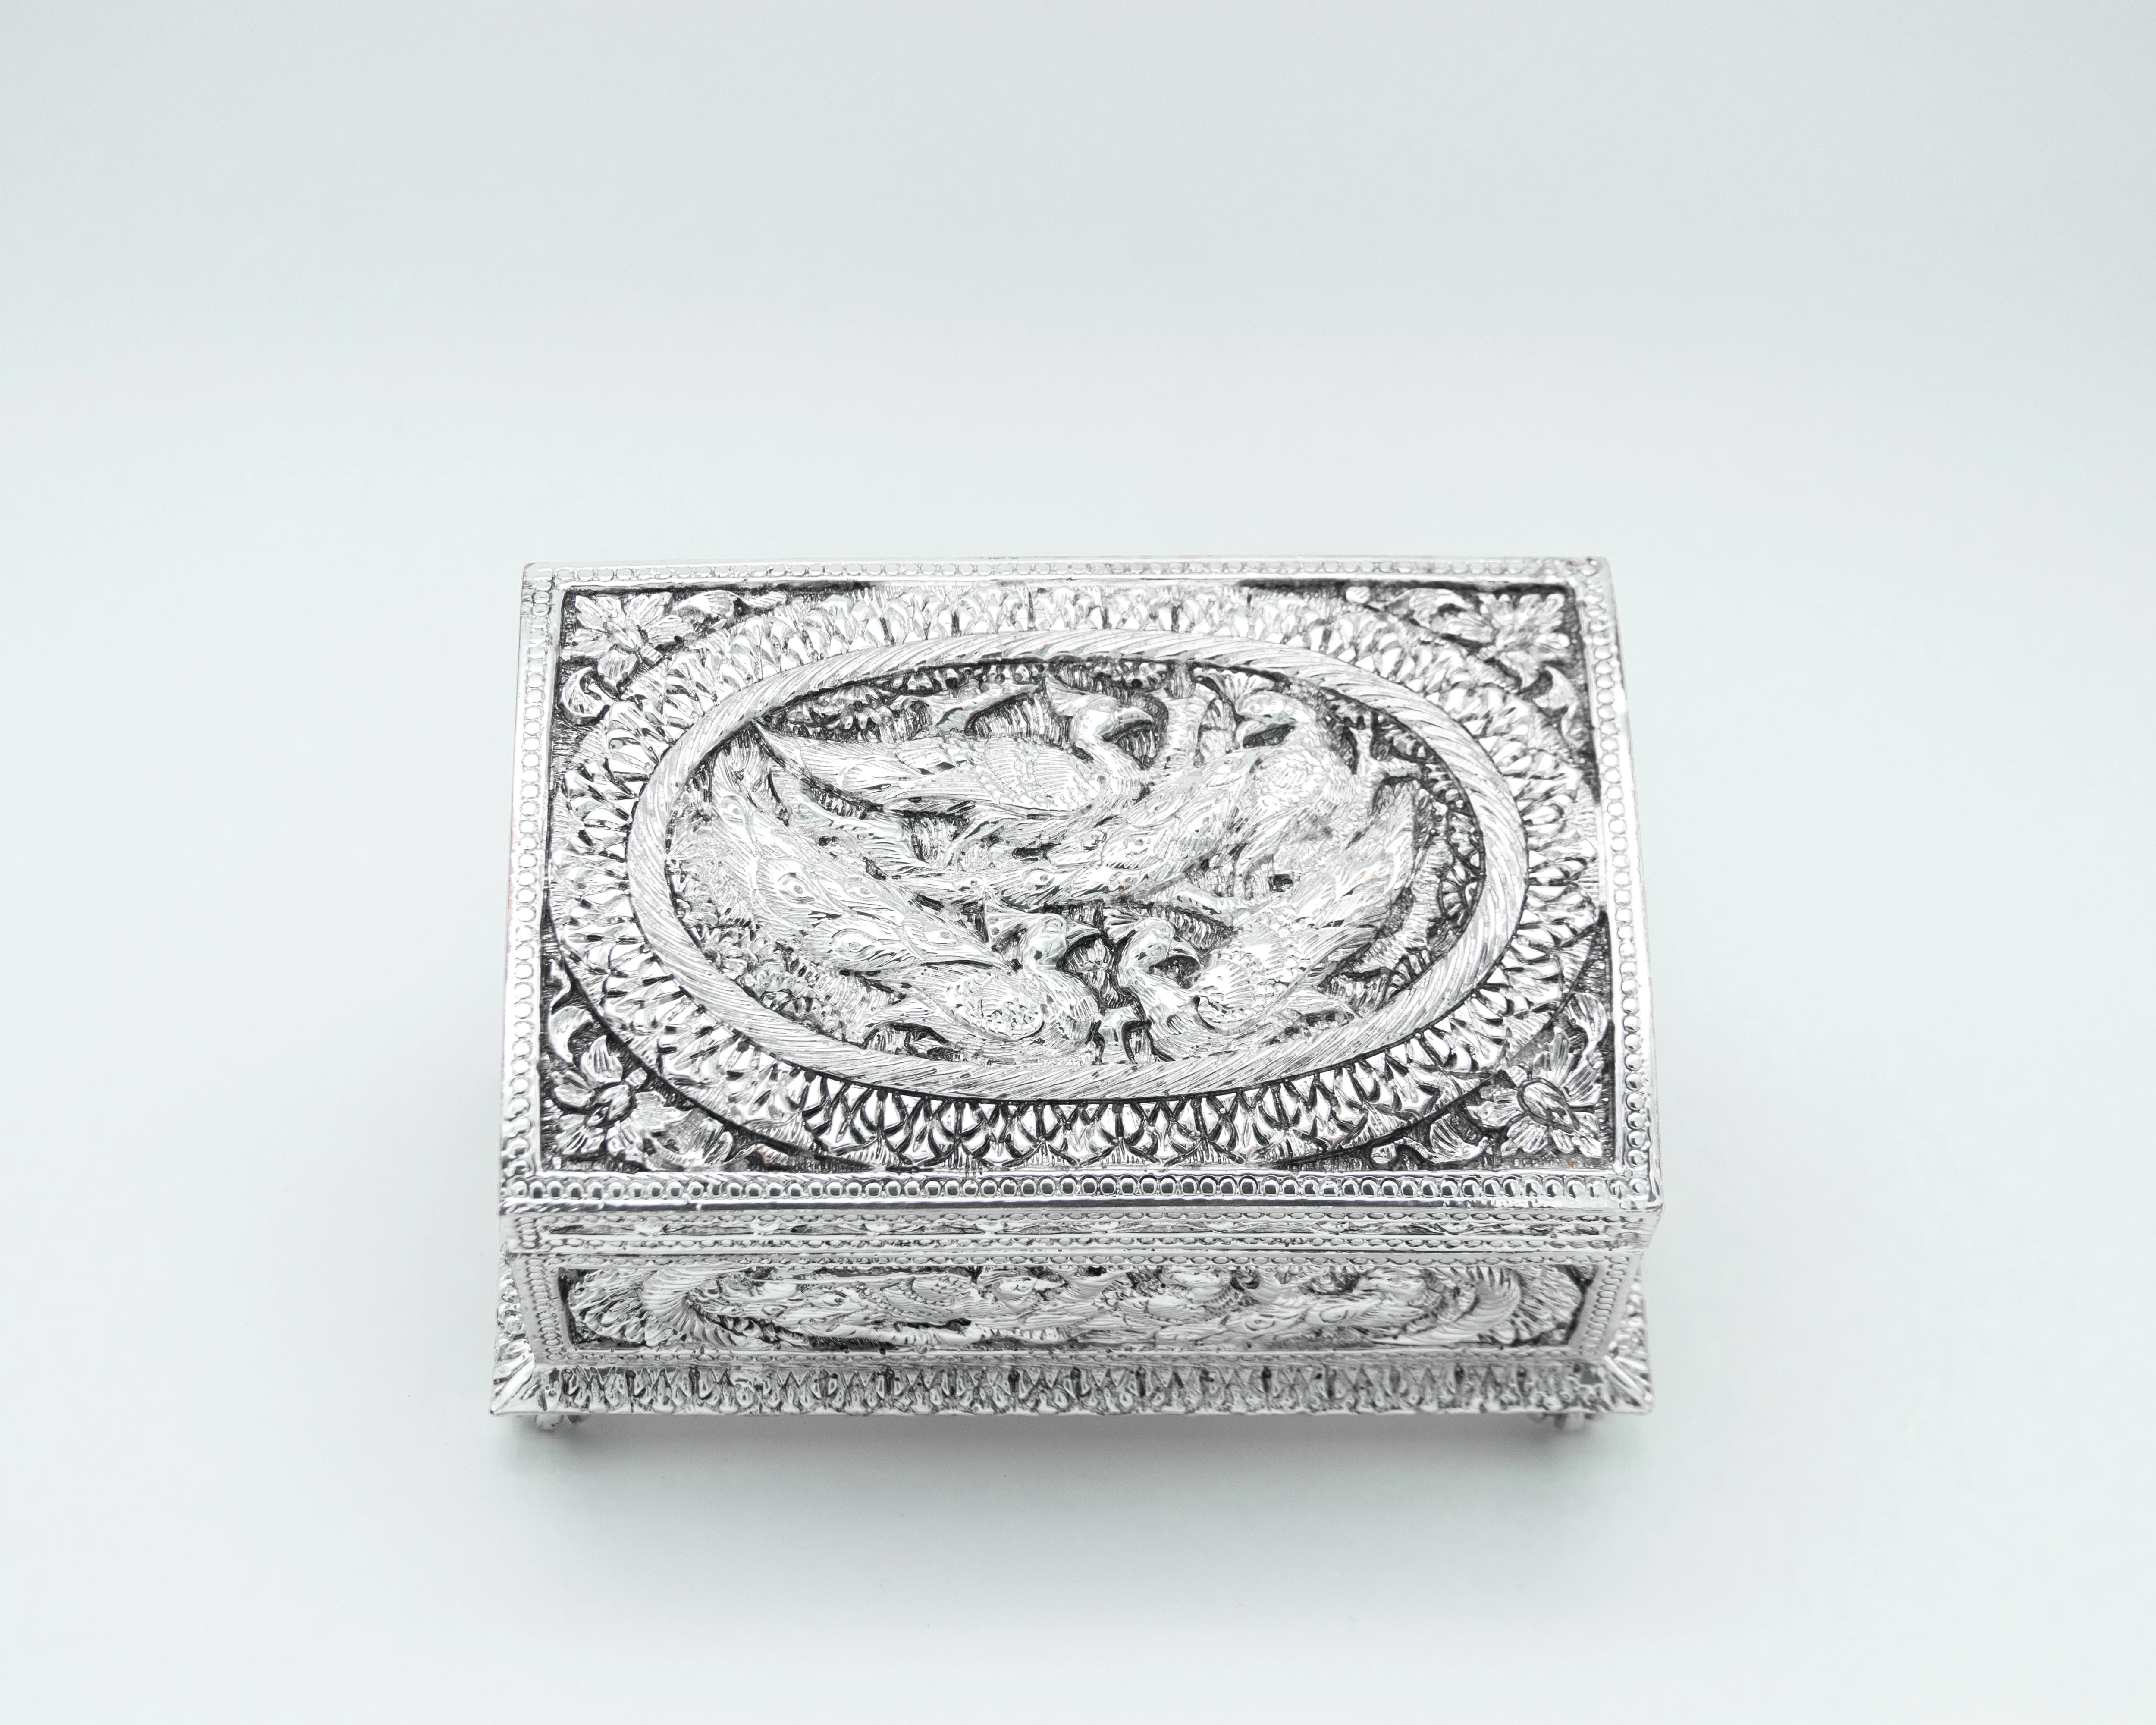 premium-Silver-Coated-Jewelry-Organizer-Box-Handcrafted-Resin-Box